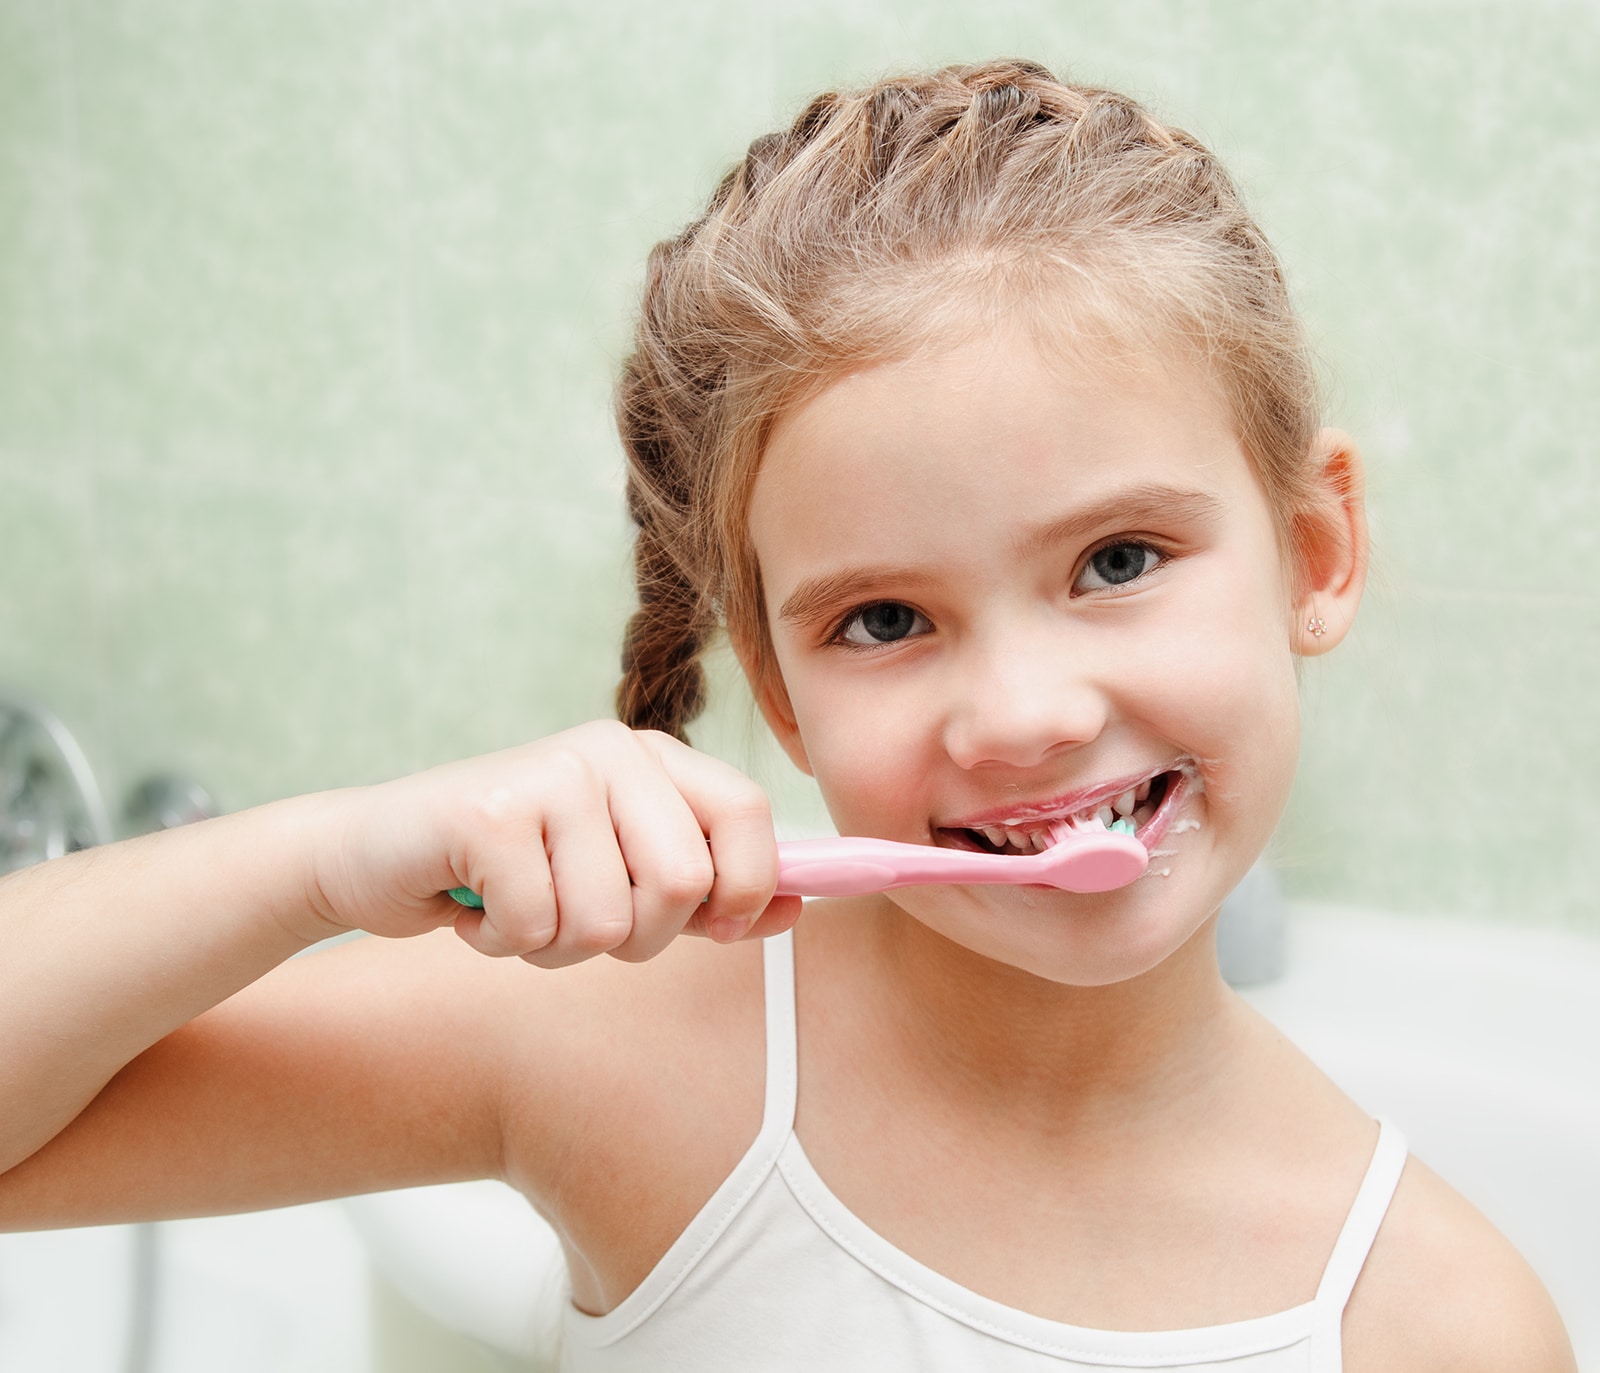 Featured image for “The Benefits of Seeing a Kid-Friendly Dentist in Robstown”